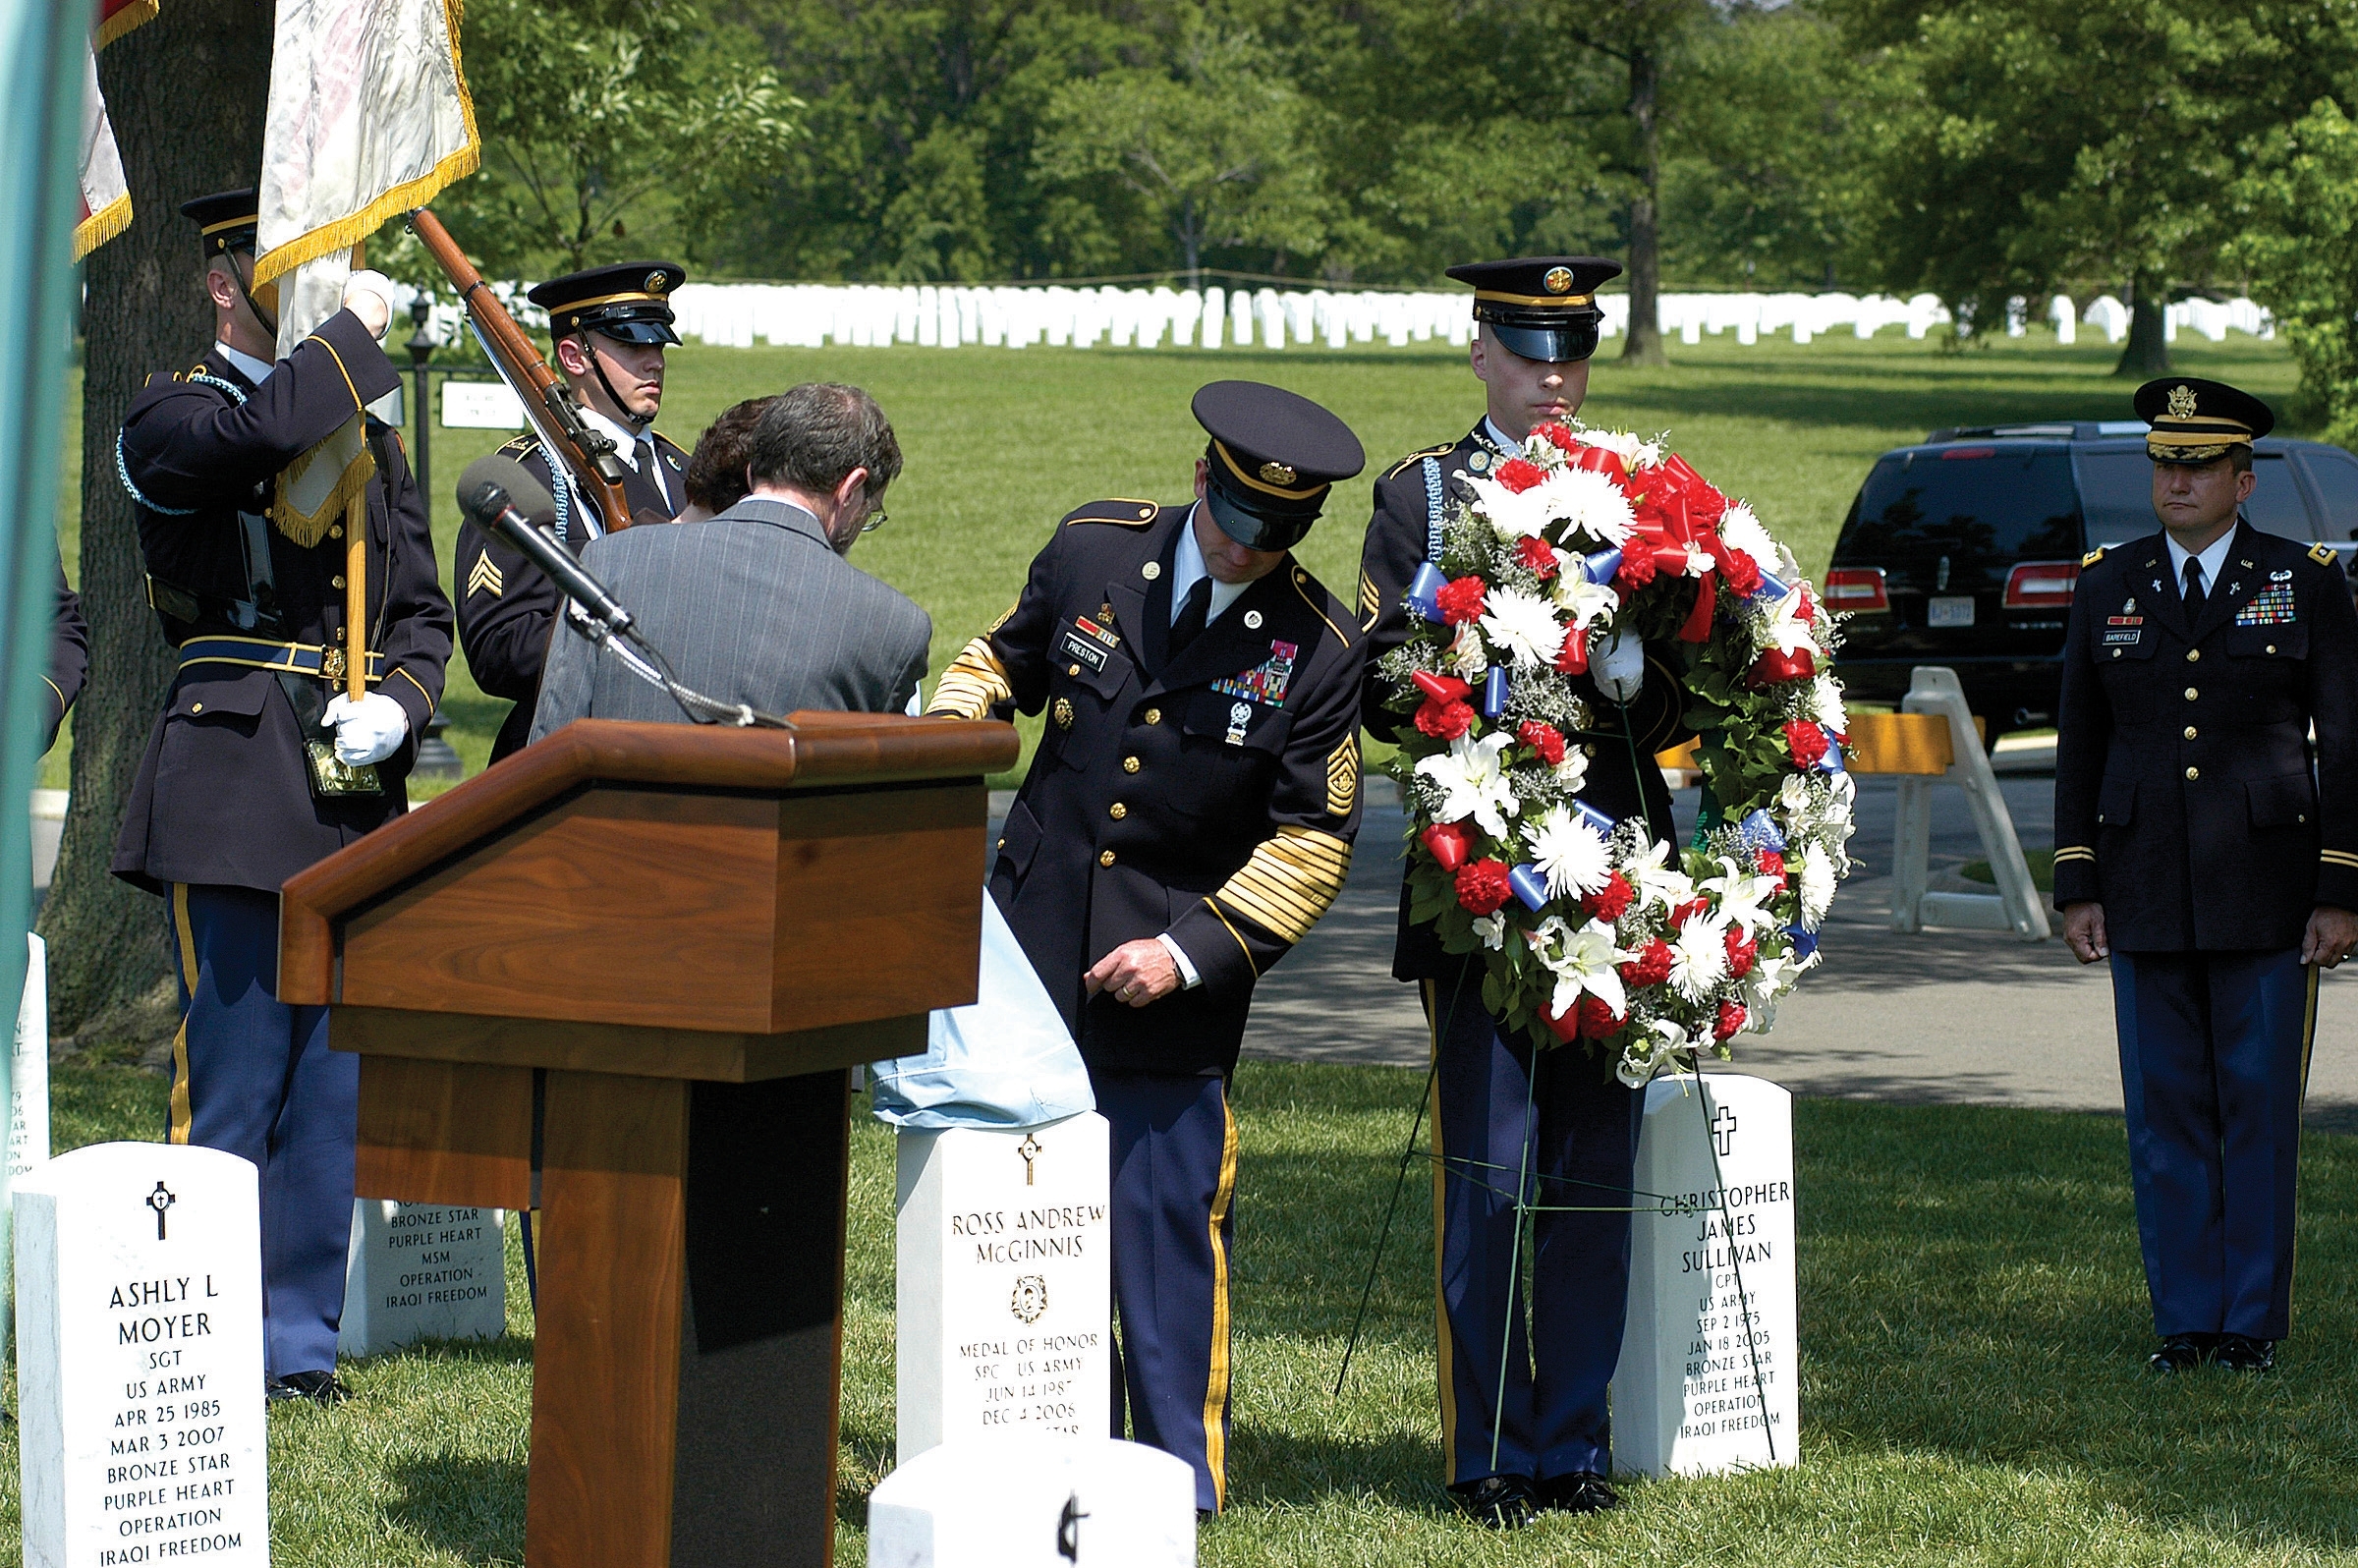 moh-headstone-unveiled-june-2008-anc-photo-01